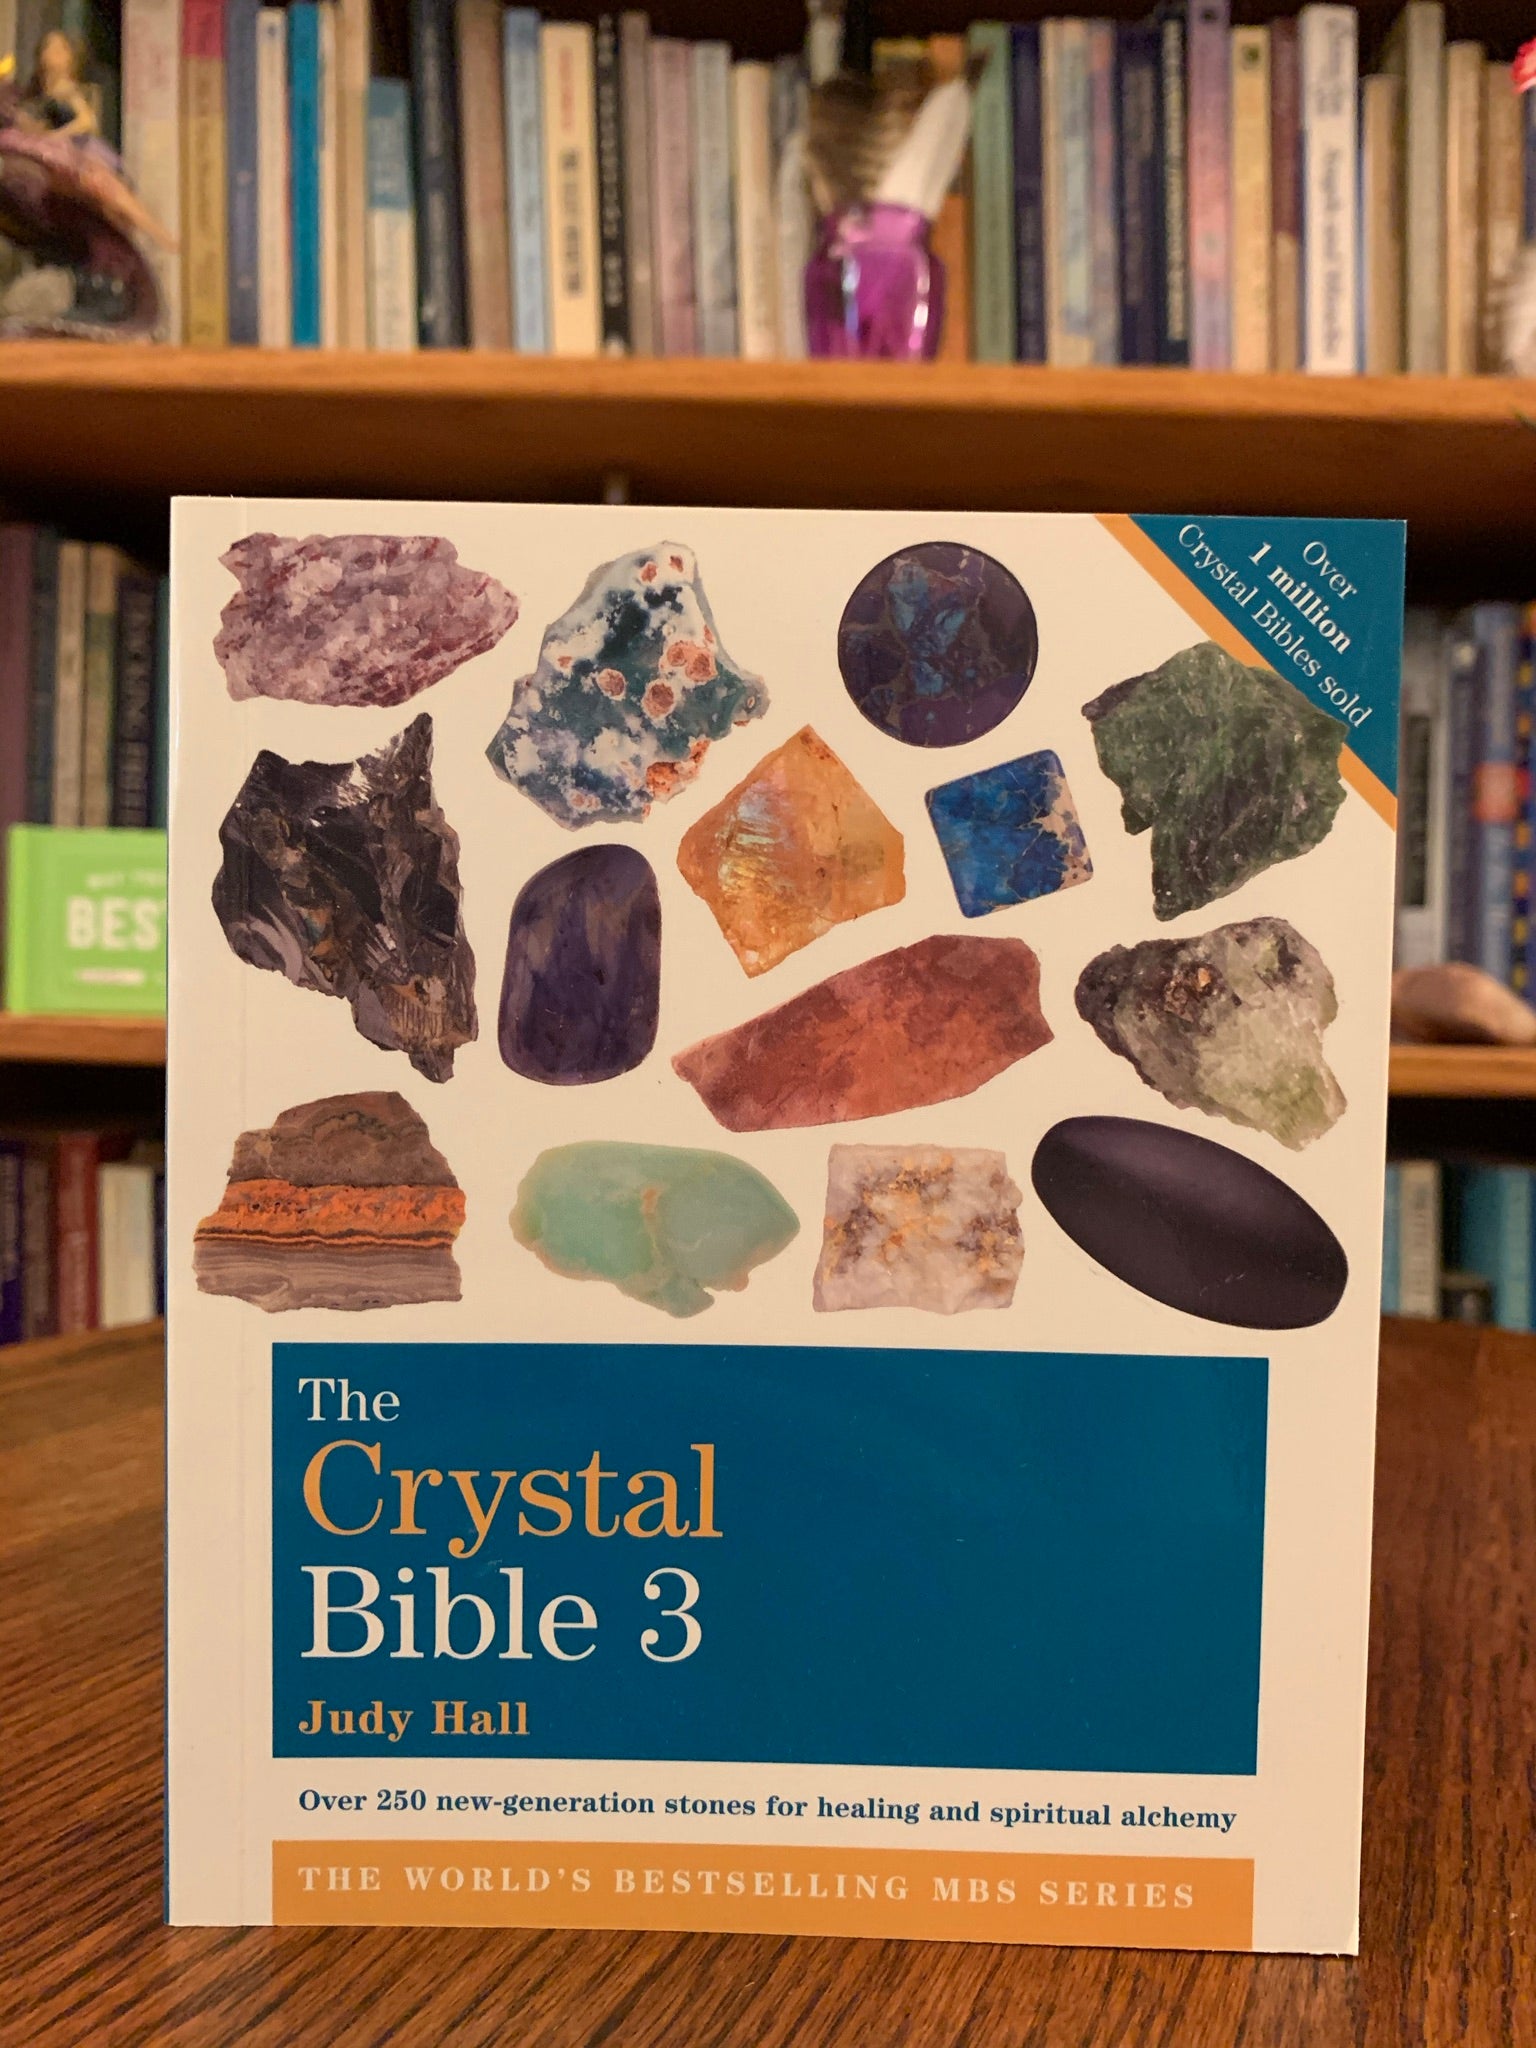 Close-up view front cover. The Crystal Bible 3 is the third comprehensive book about crystals and gemstones by Judy Hall, including 250 additional crystals. It is 400 pages long and made with high quality paper. Most of the book is devoted to in depth descriptions of the esoteric and practical properties of stones and crystals, but she also includes sections on crystal vibrations, crystal skulls and more. She has written three separate volumes of her crystal Bible books and also a book on crystal healing.